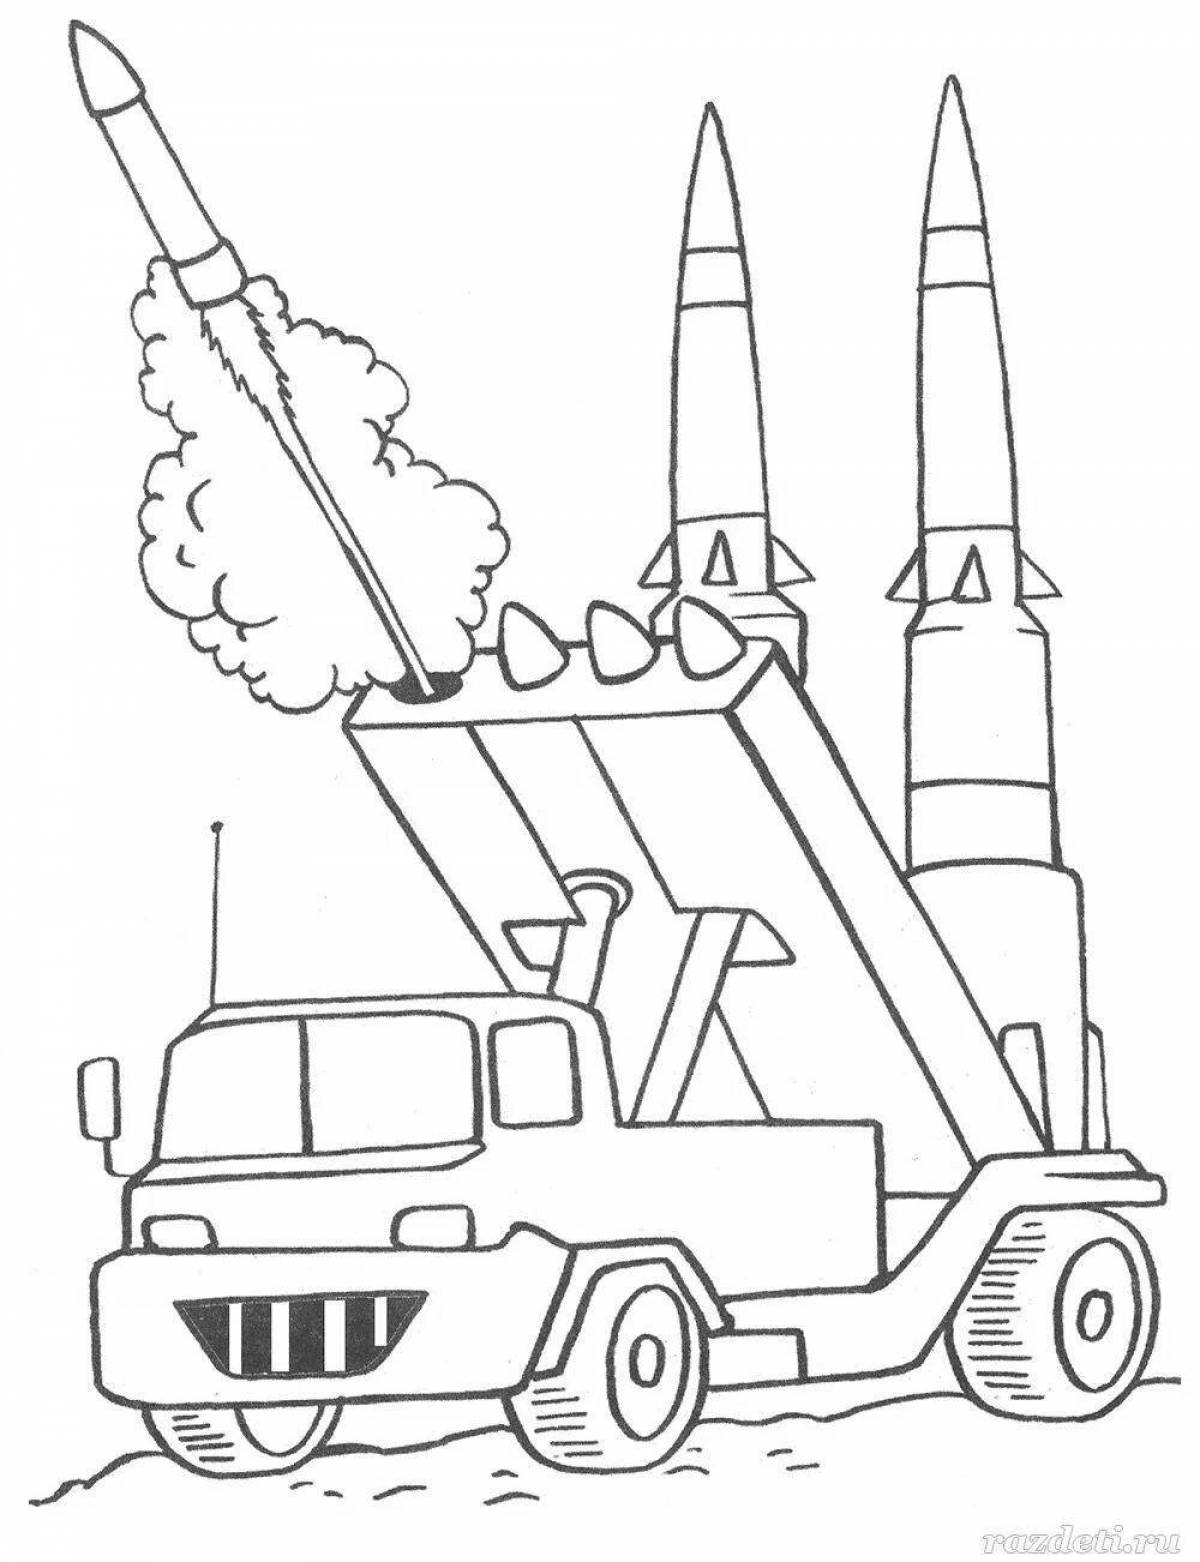 Coloring page elegant military vehicle